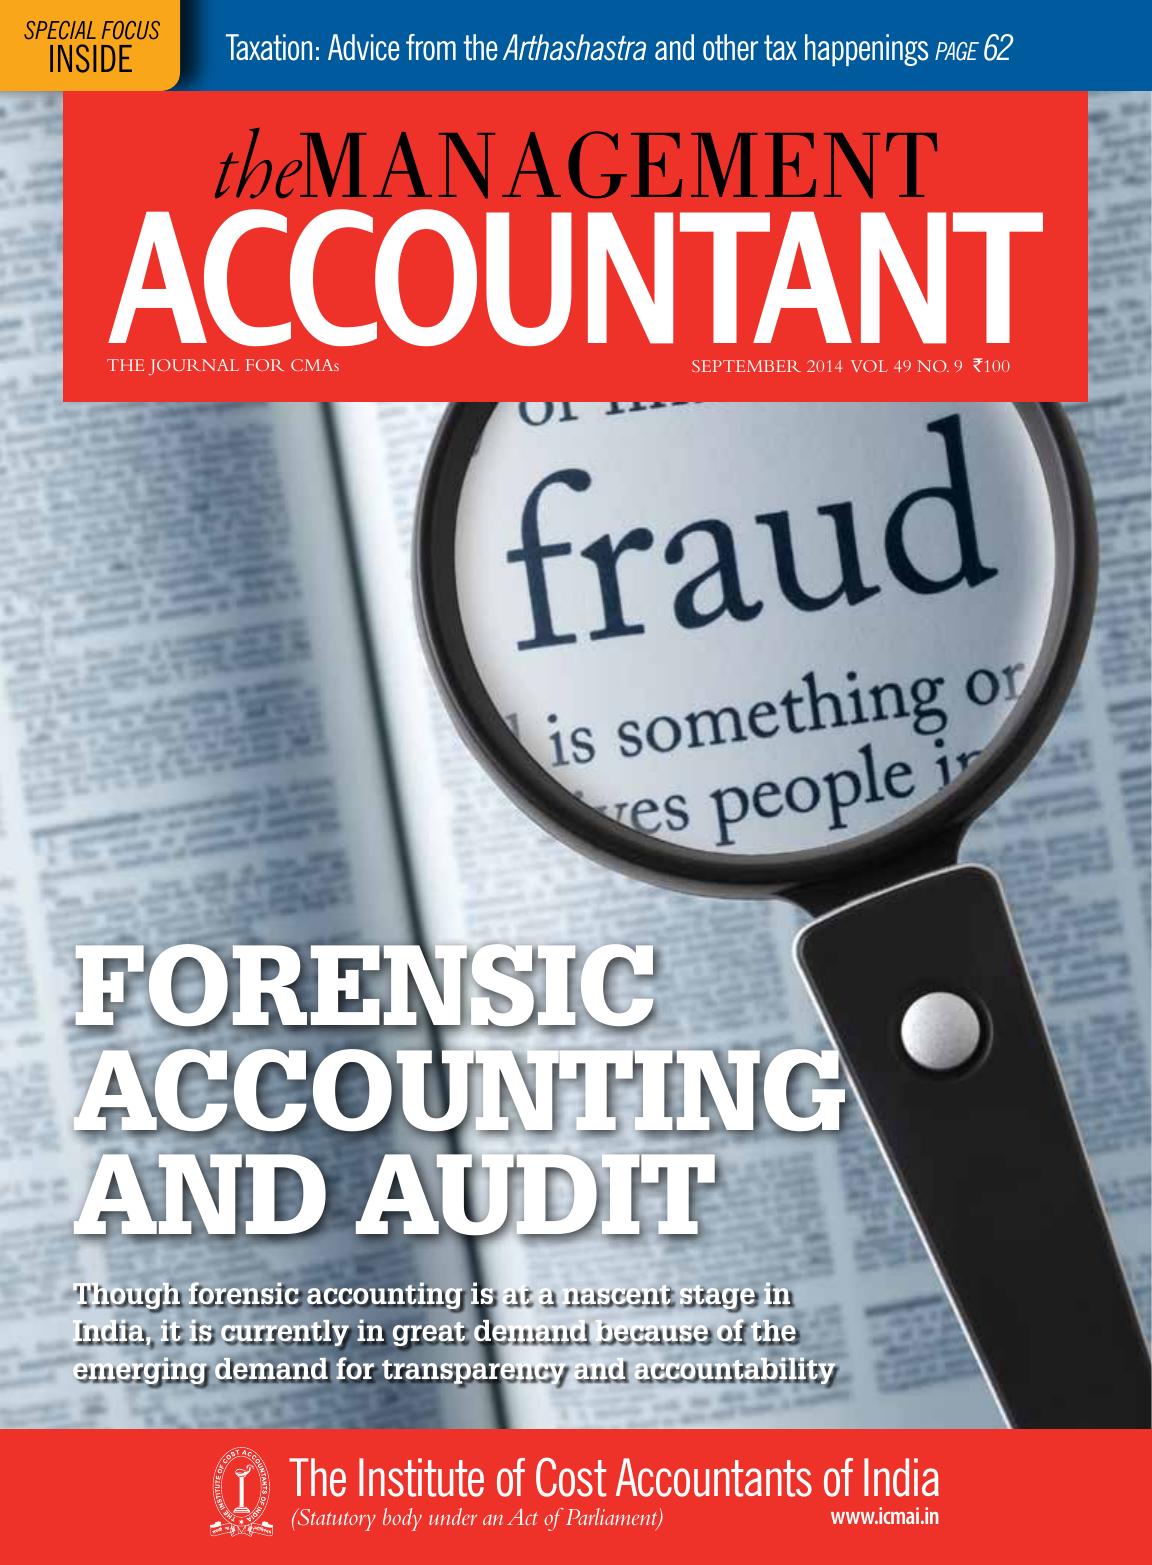 Forensic Accounting and Audit